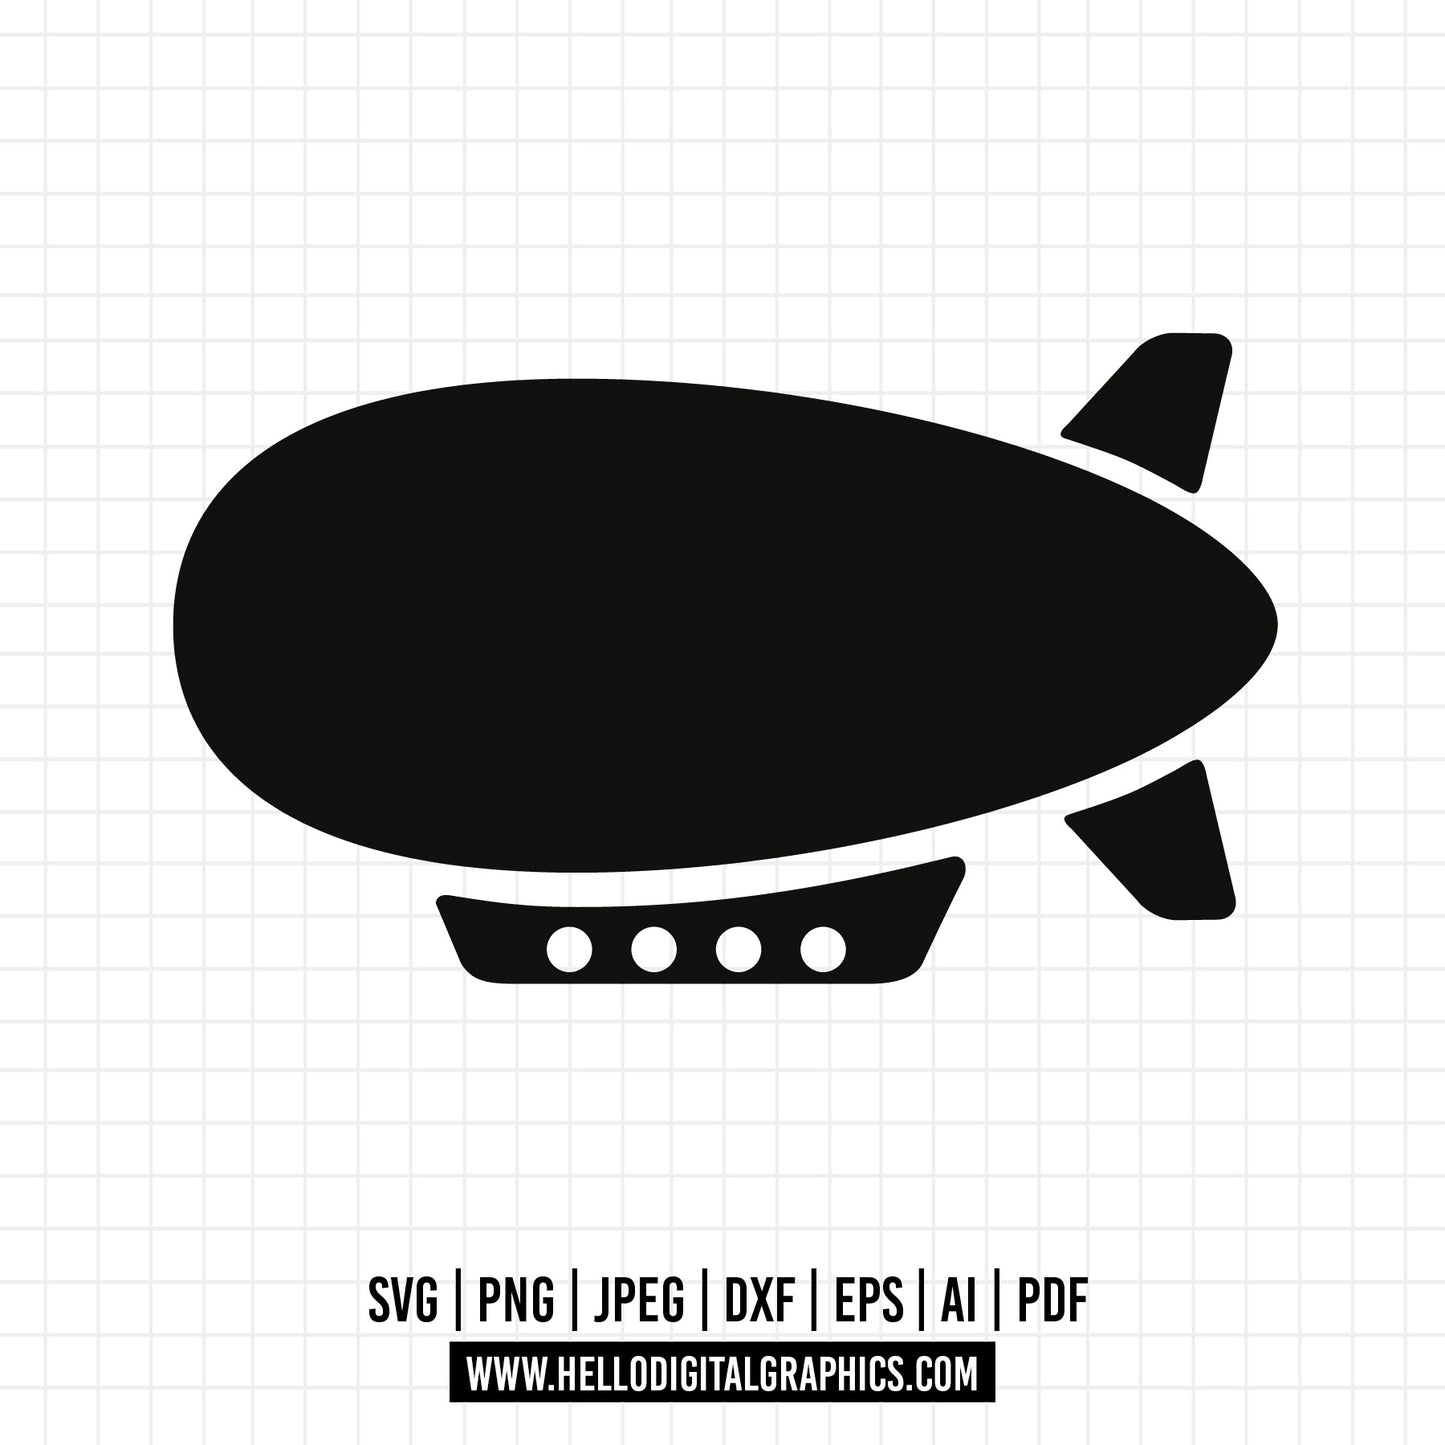 COD670- Blimp Dirigible Zeppelin Airship Silhouette Clipart Digital Download SVG EPS PNG pdf ai dxf jpg Cut Files Commercial Use,,Vehicles svg